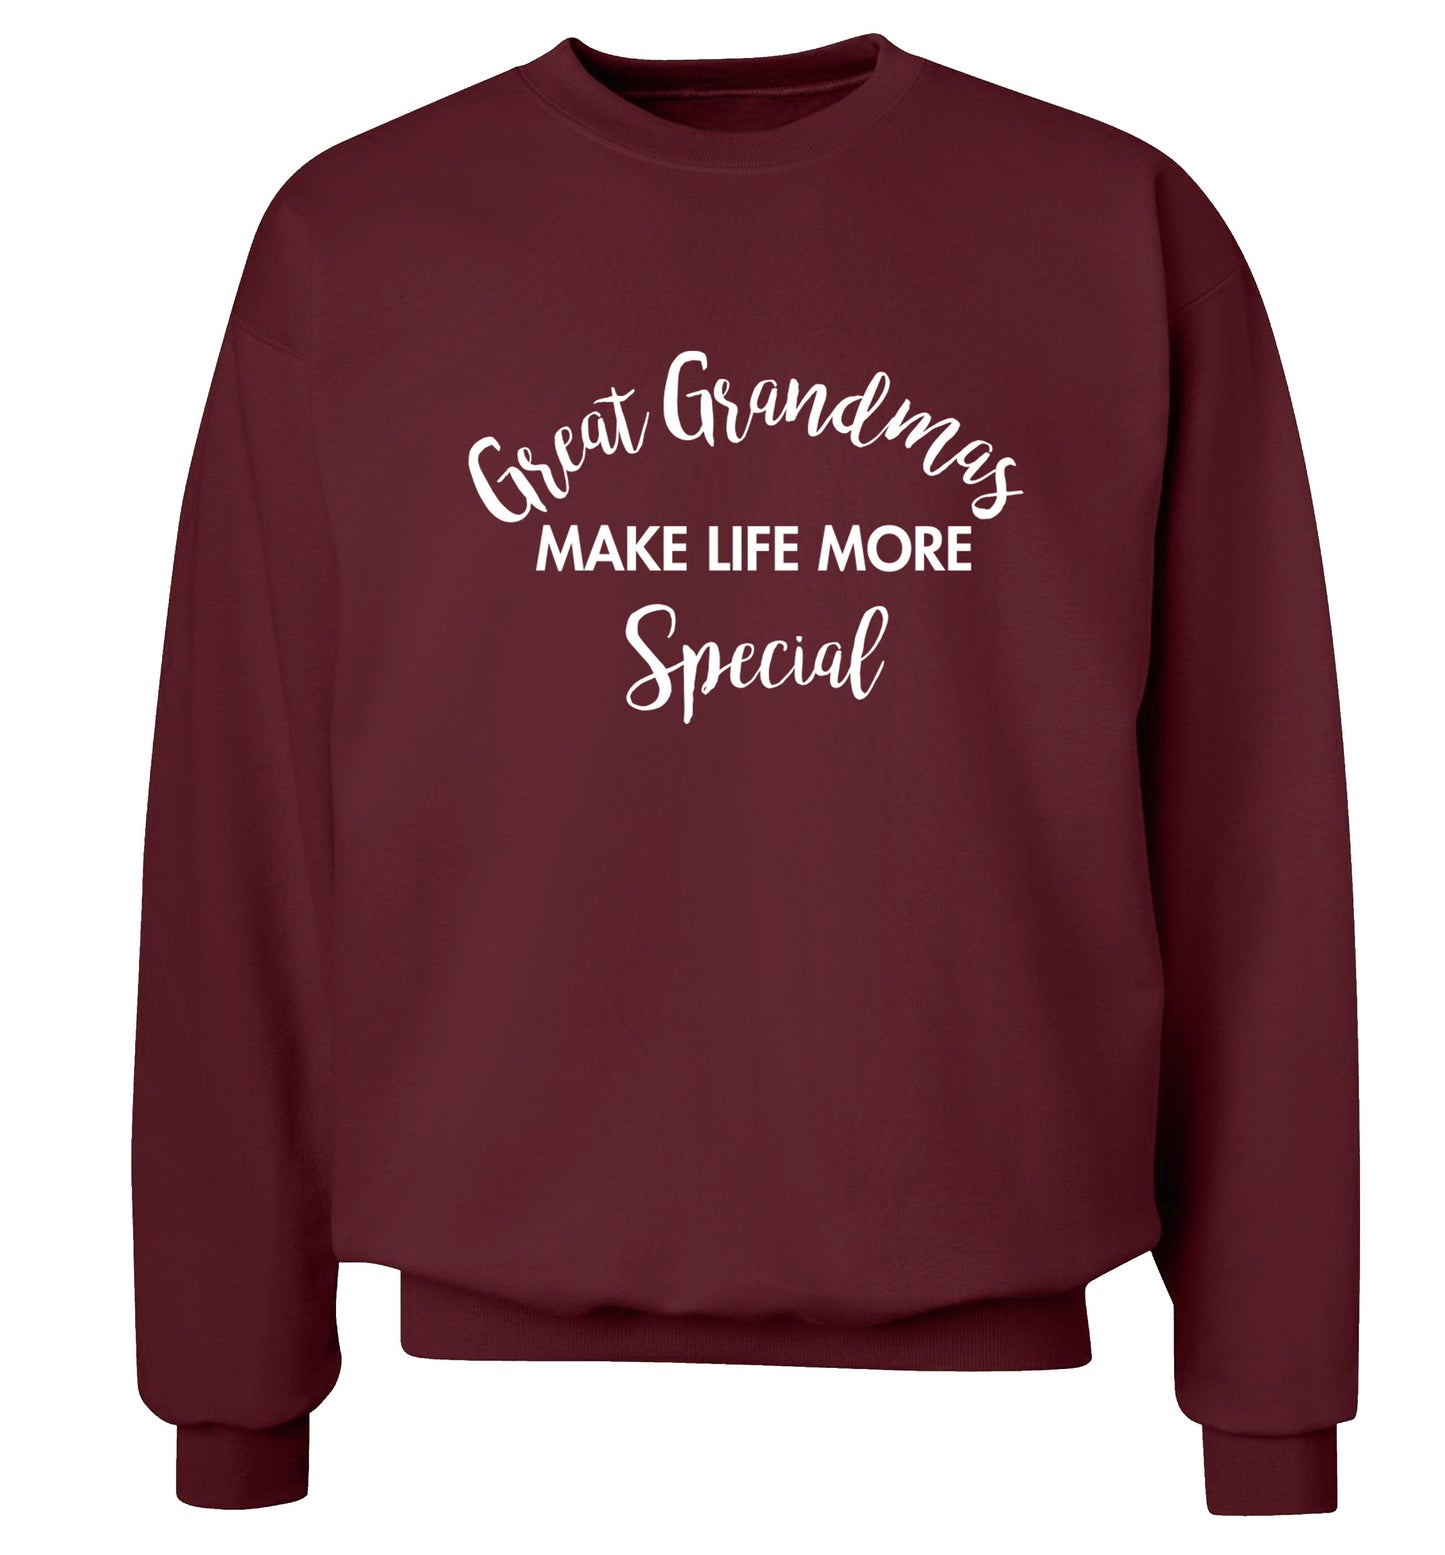 Great Grandmas make life more special Adult's unisex maroon Sweater 2XL